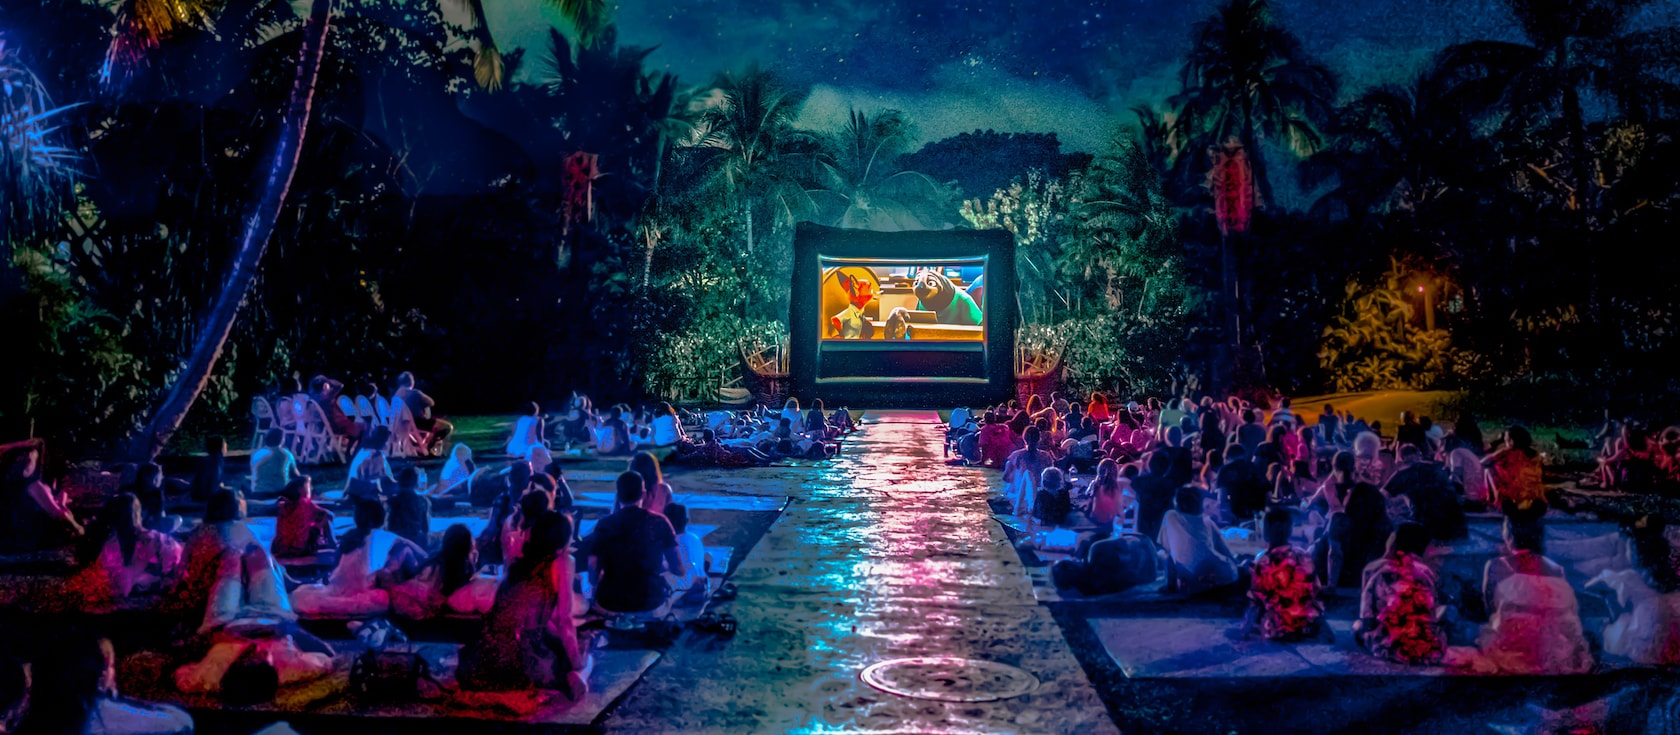 Guests seated on a large lawn, watching a movie screening after dark